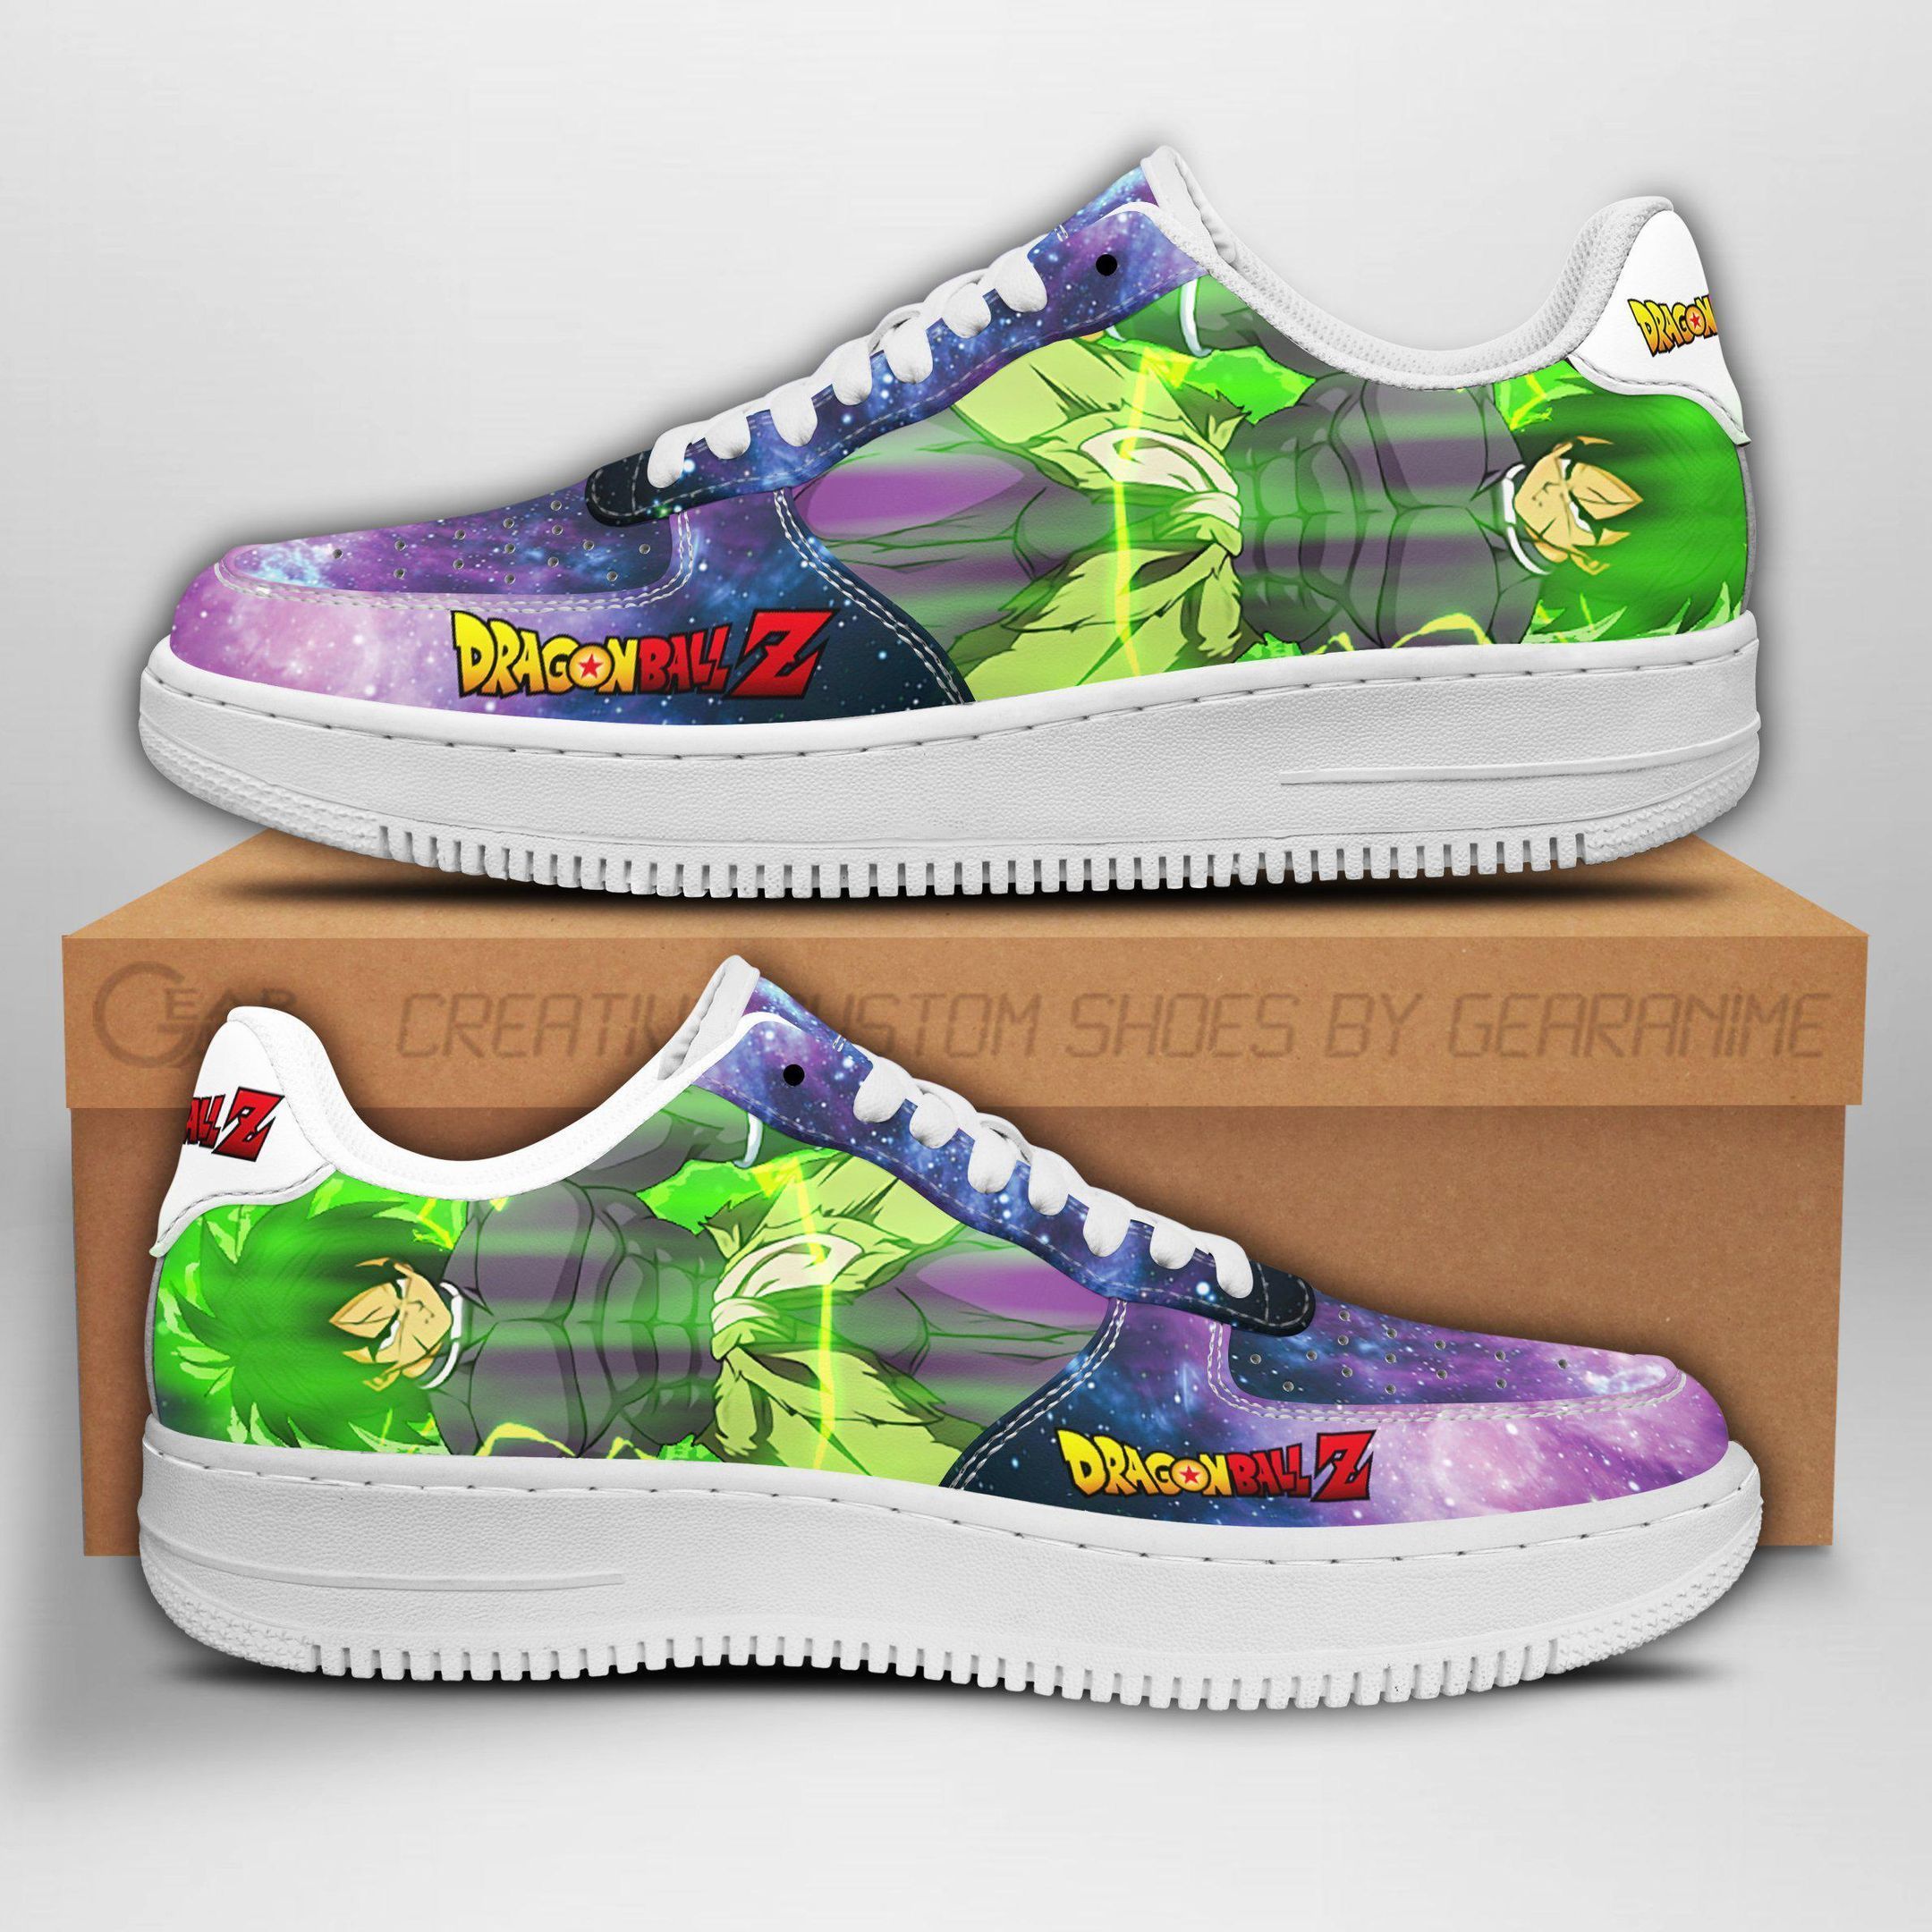 Broly Air Shoes Dragon Ball Z Anime Shoes Fan Gift GO1012